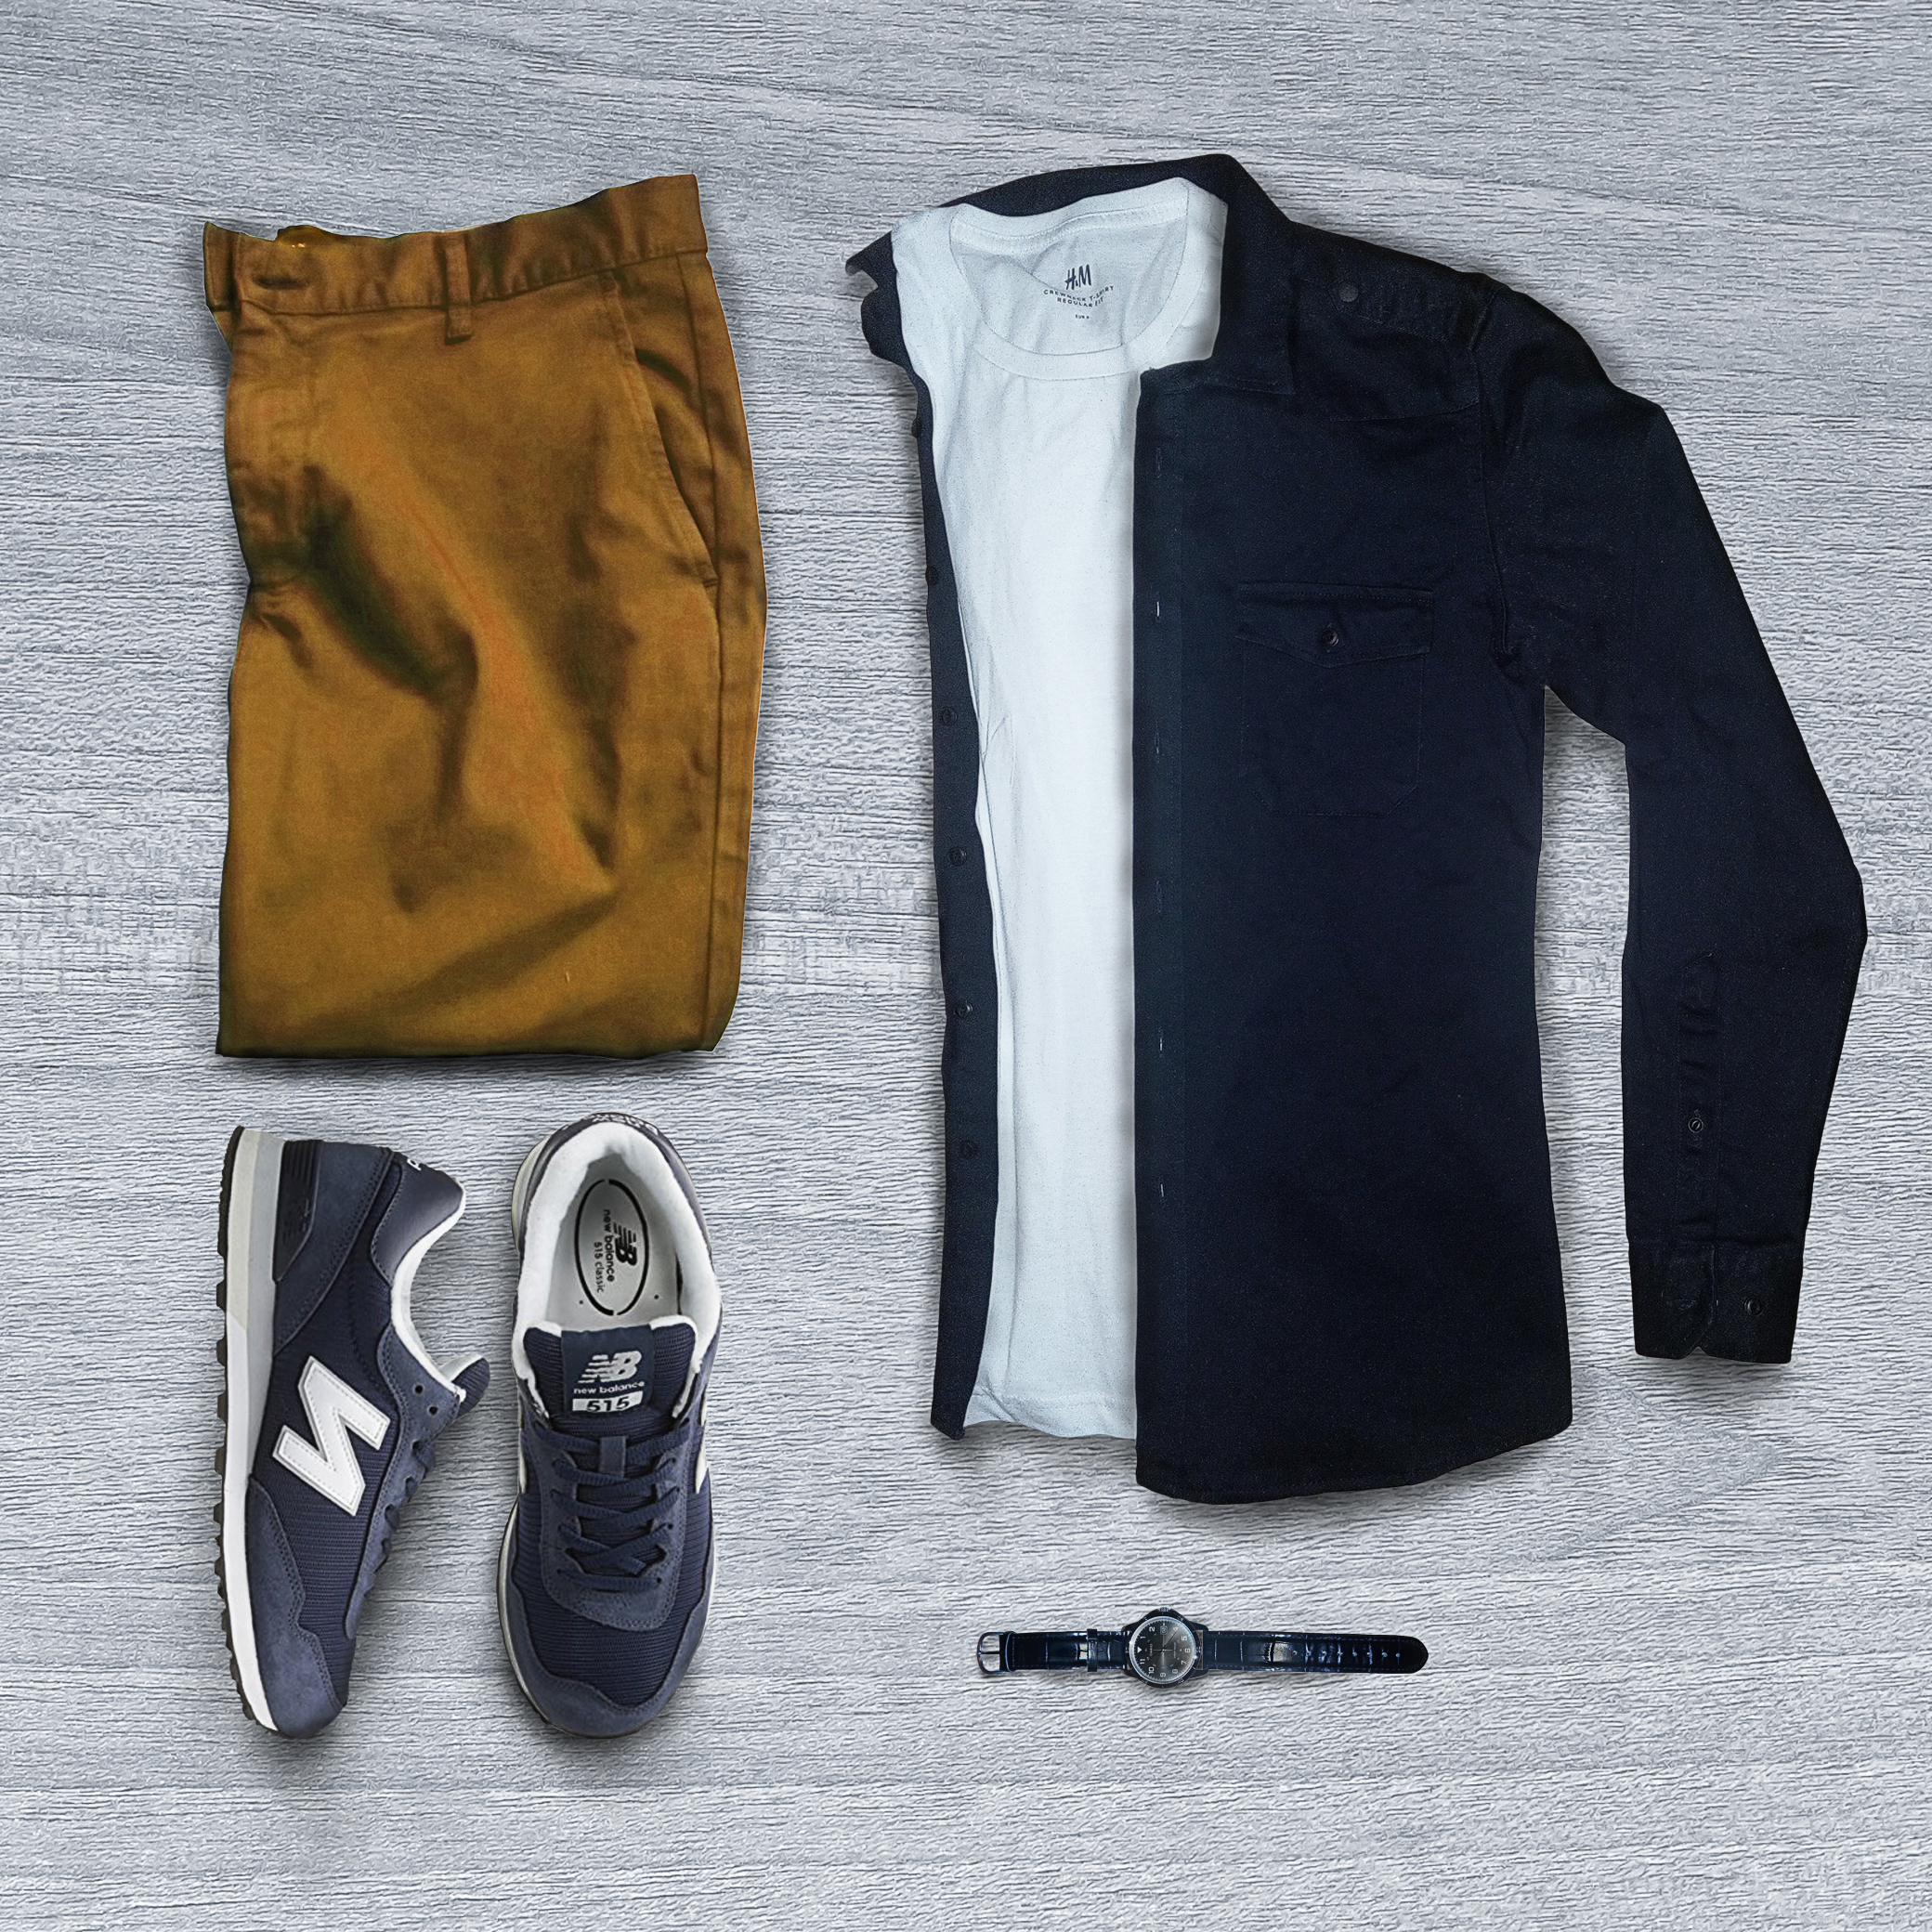 new balance outfit men